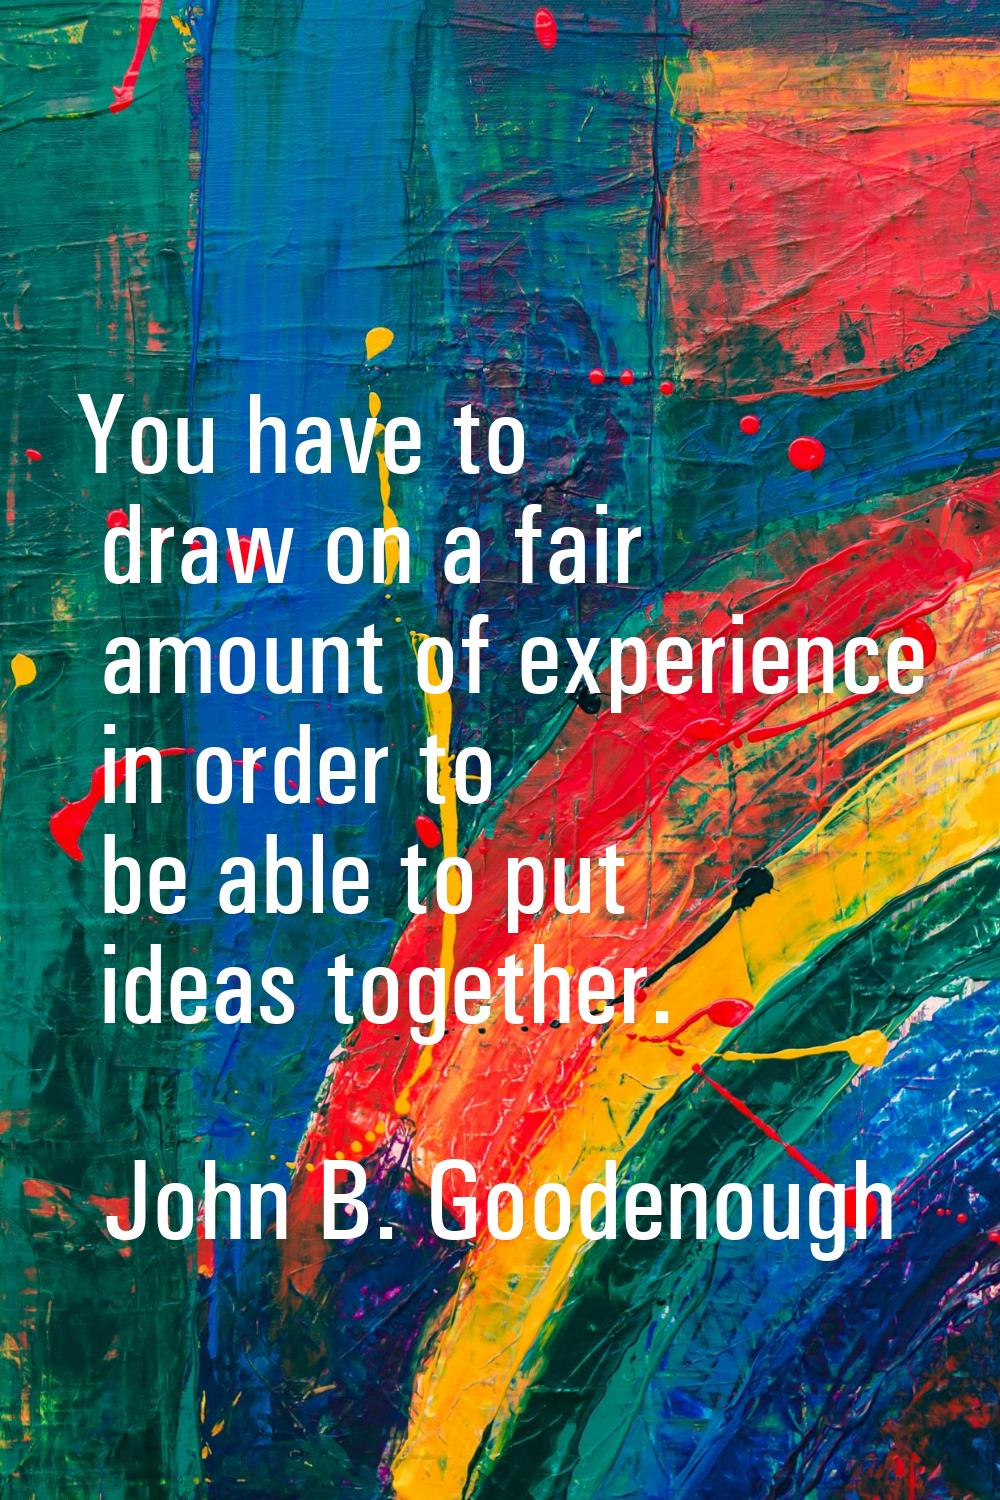 You have to draw on a fair amount of experience in order to be able to put ideas together.